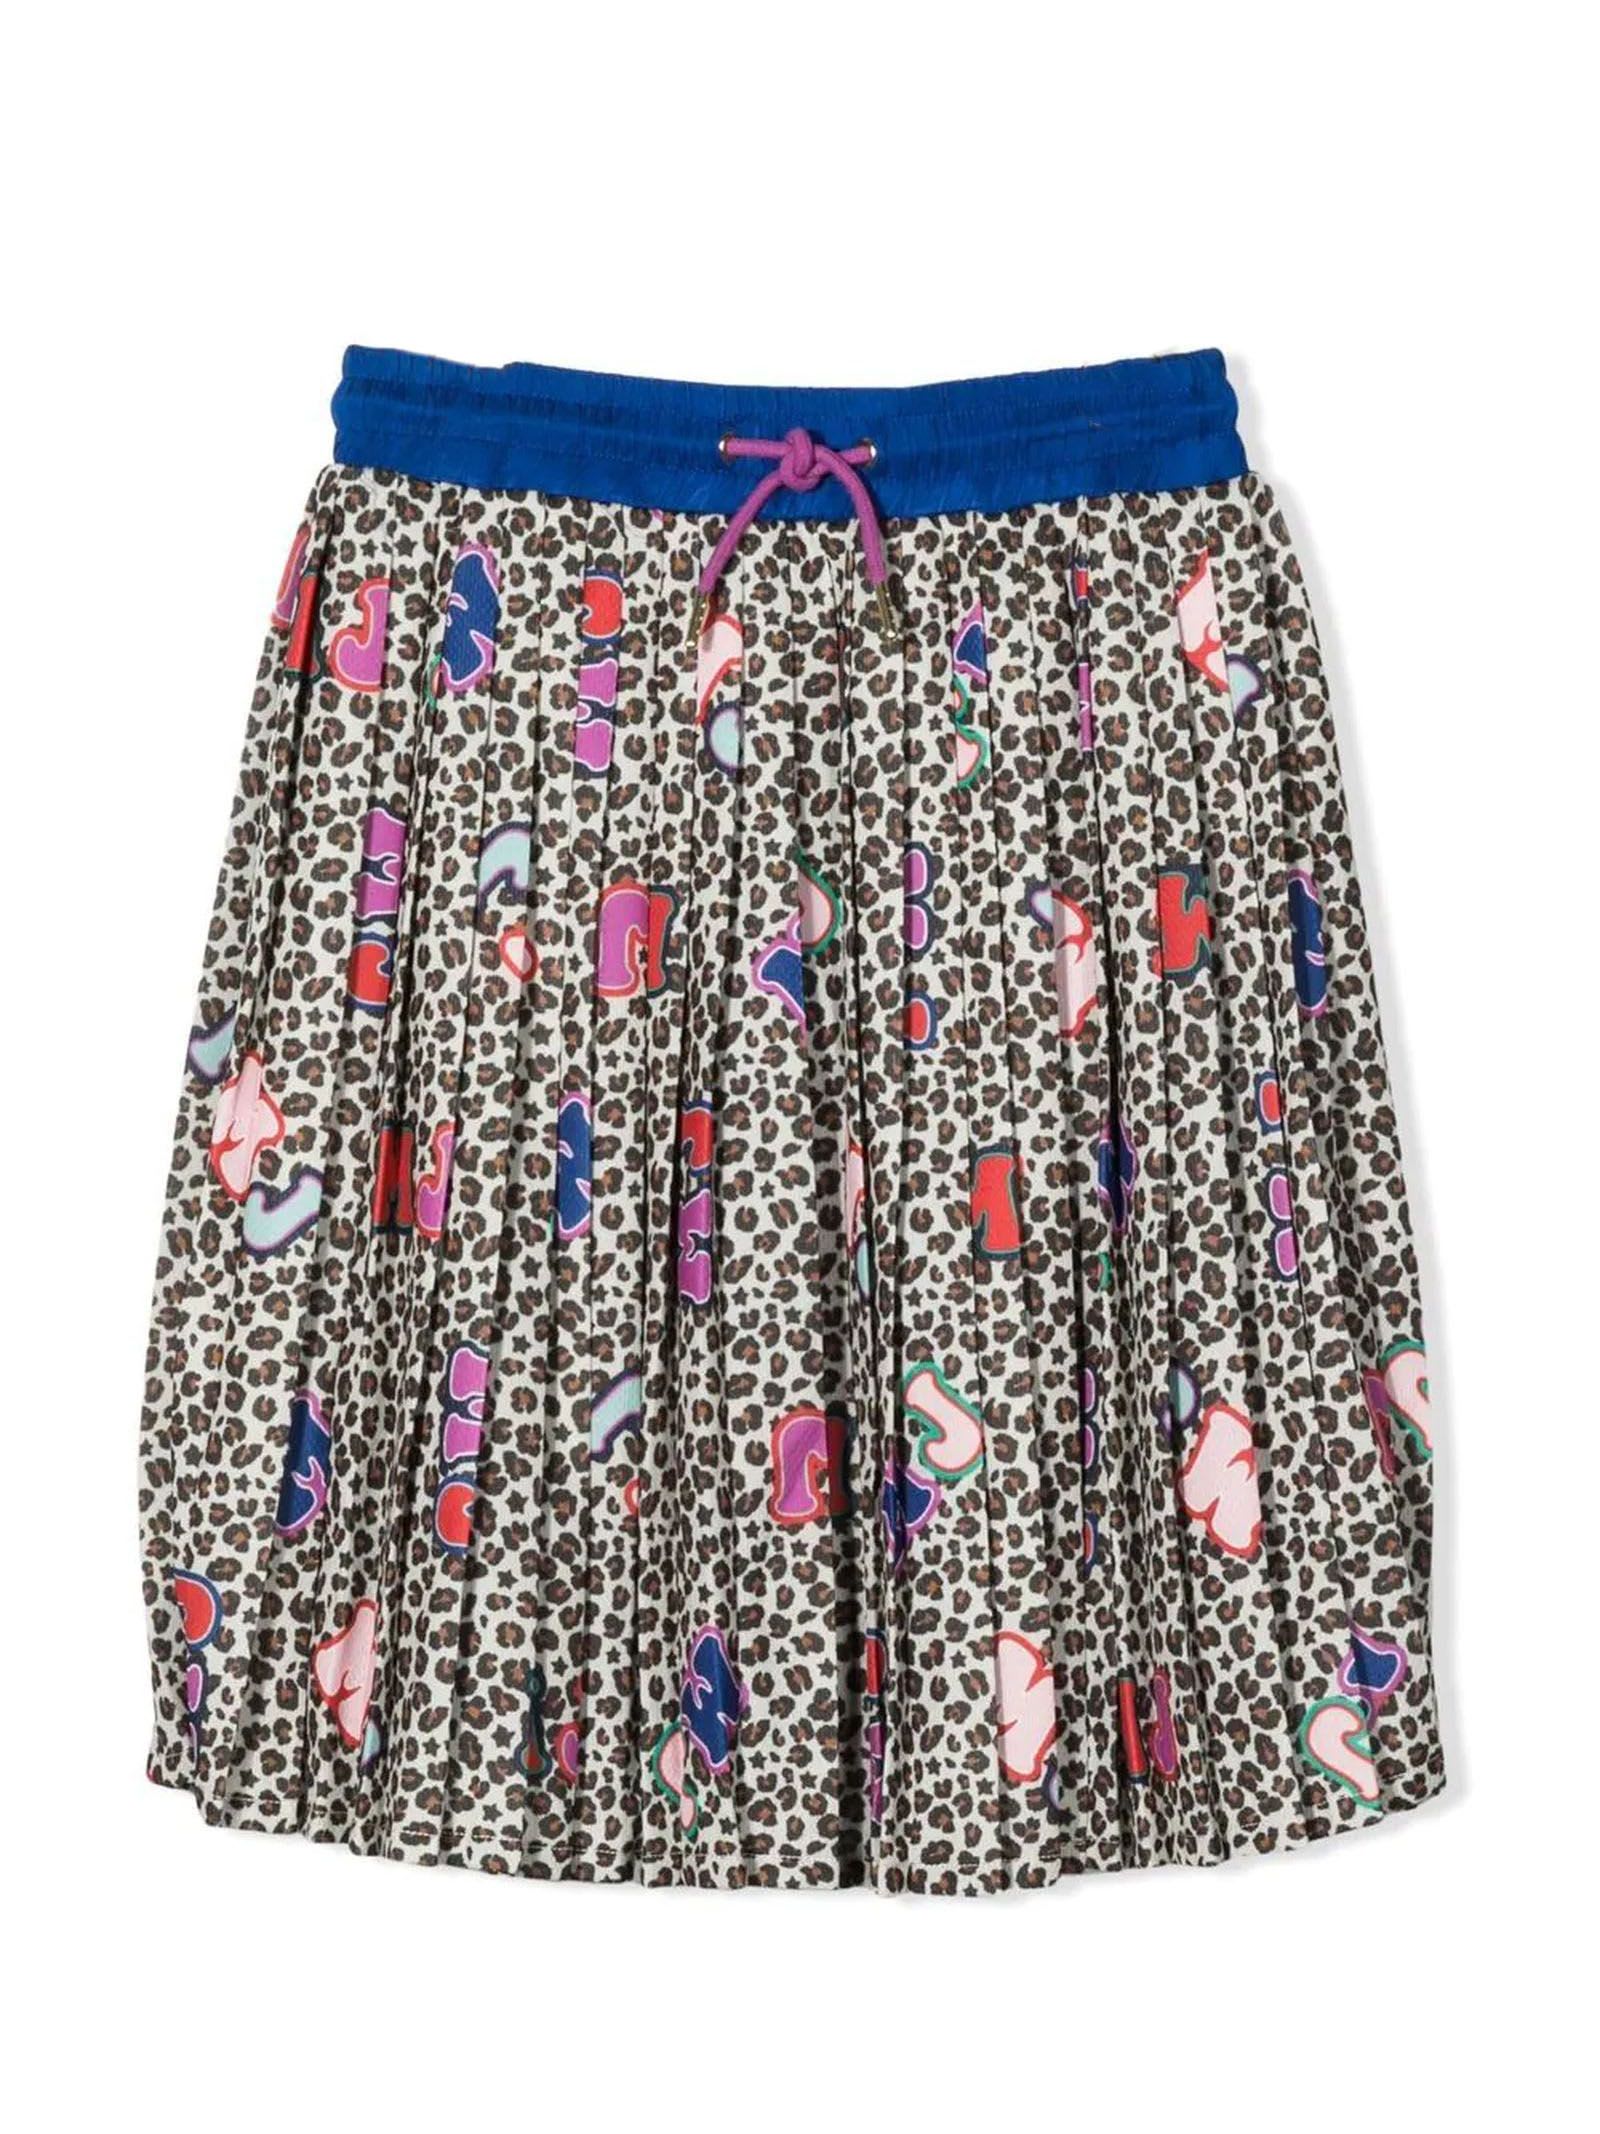 MARC JACOBS MULTICOLOR POLYESTER SKIRT